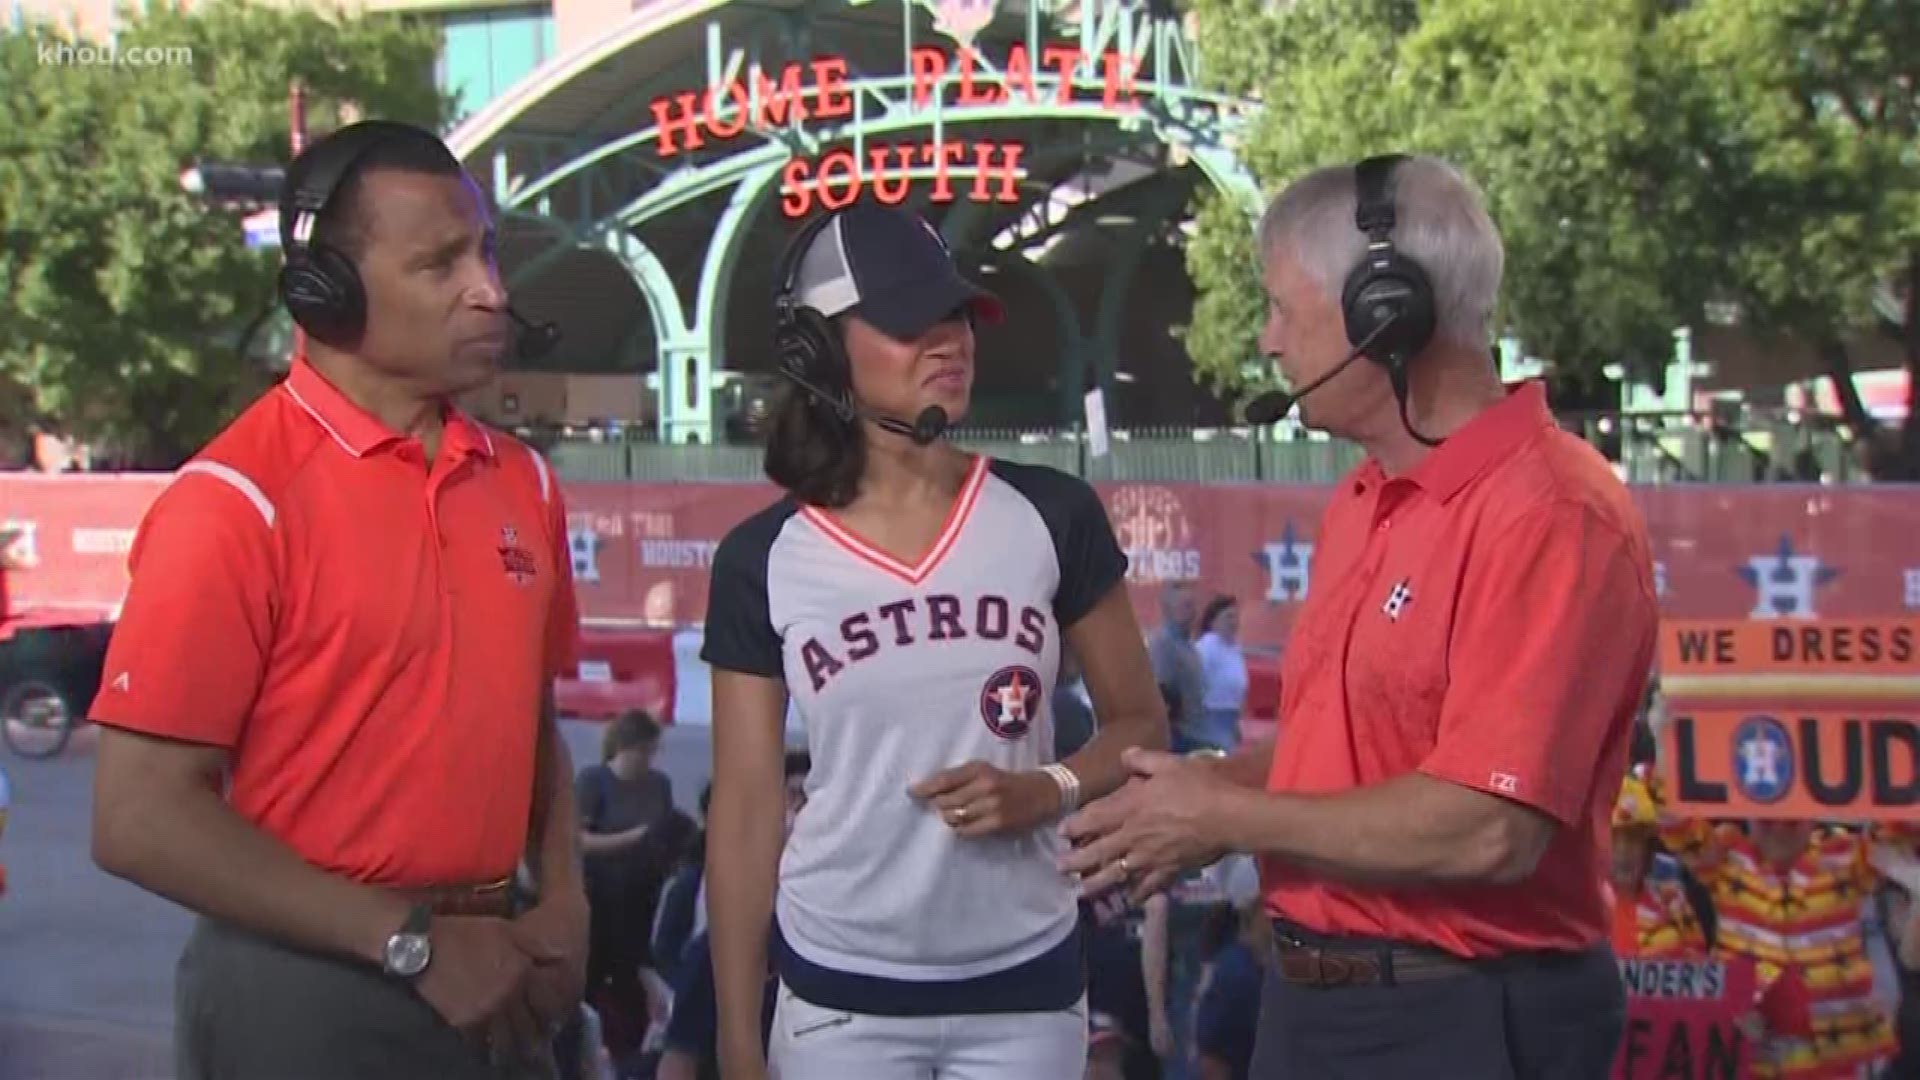 Astros play-by-play broadcaster for more than 30 years, Bill Brown, talks to Len and Mia about what to expect in Game 2 of the World Series.